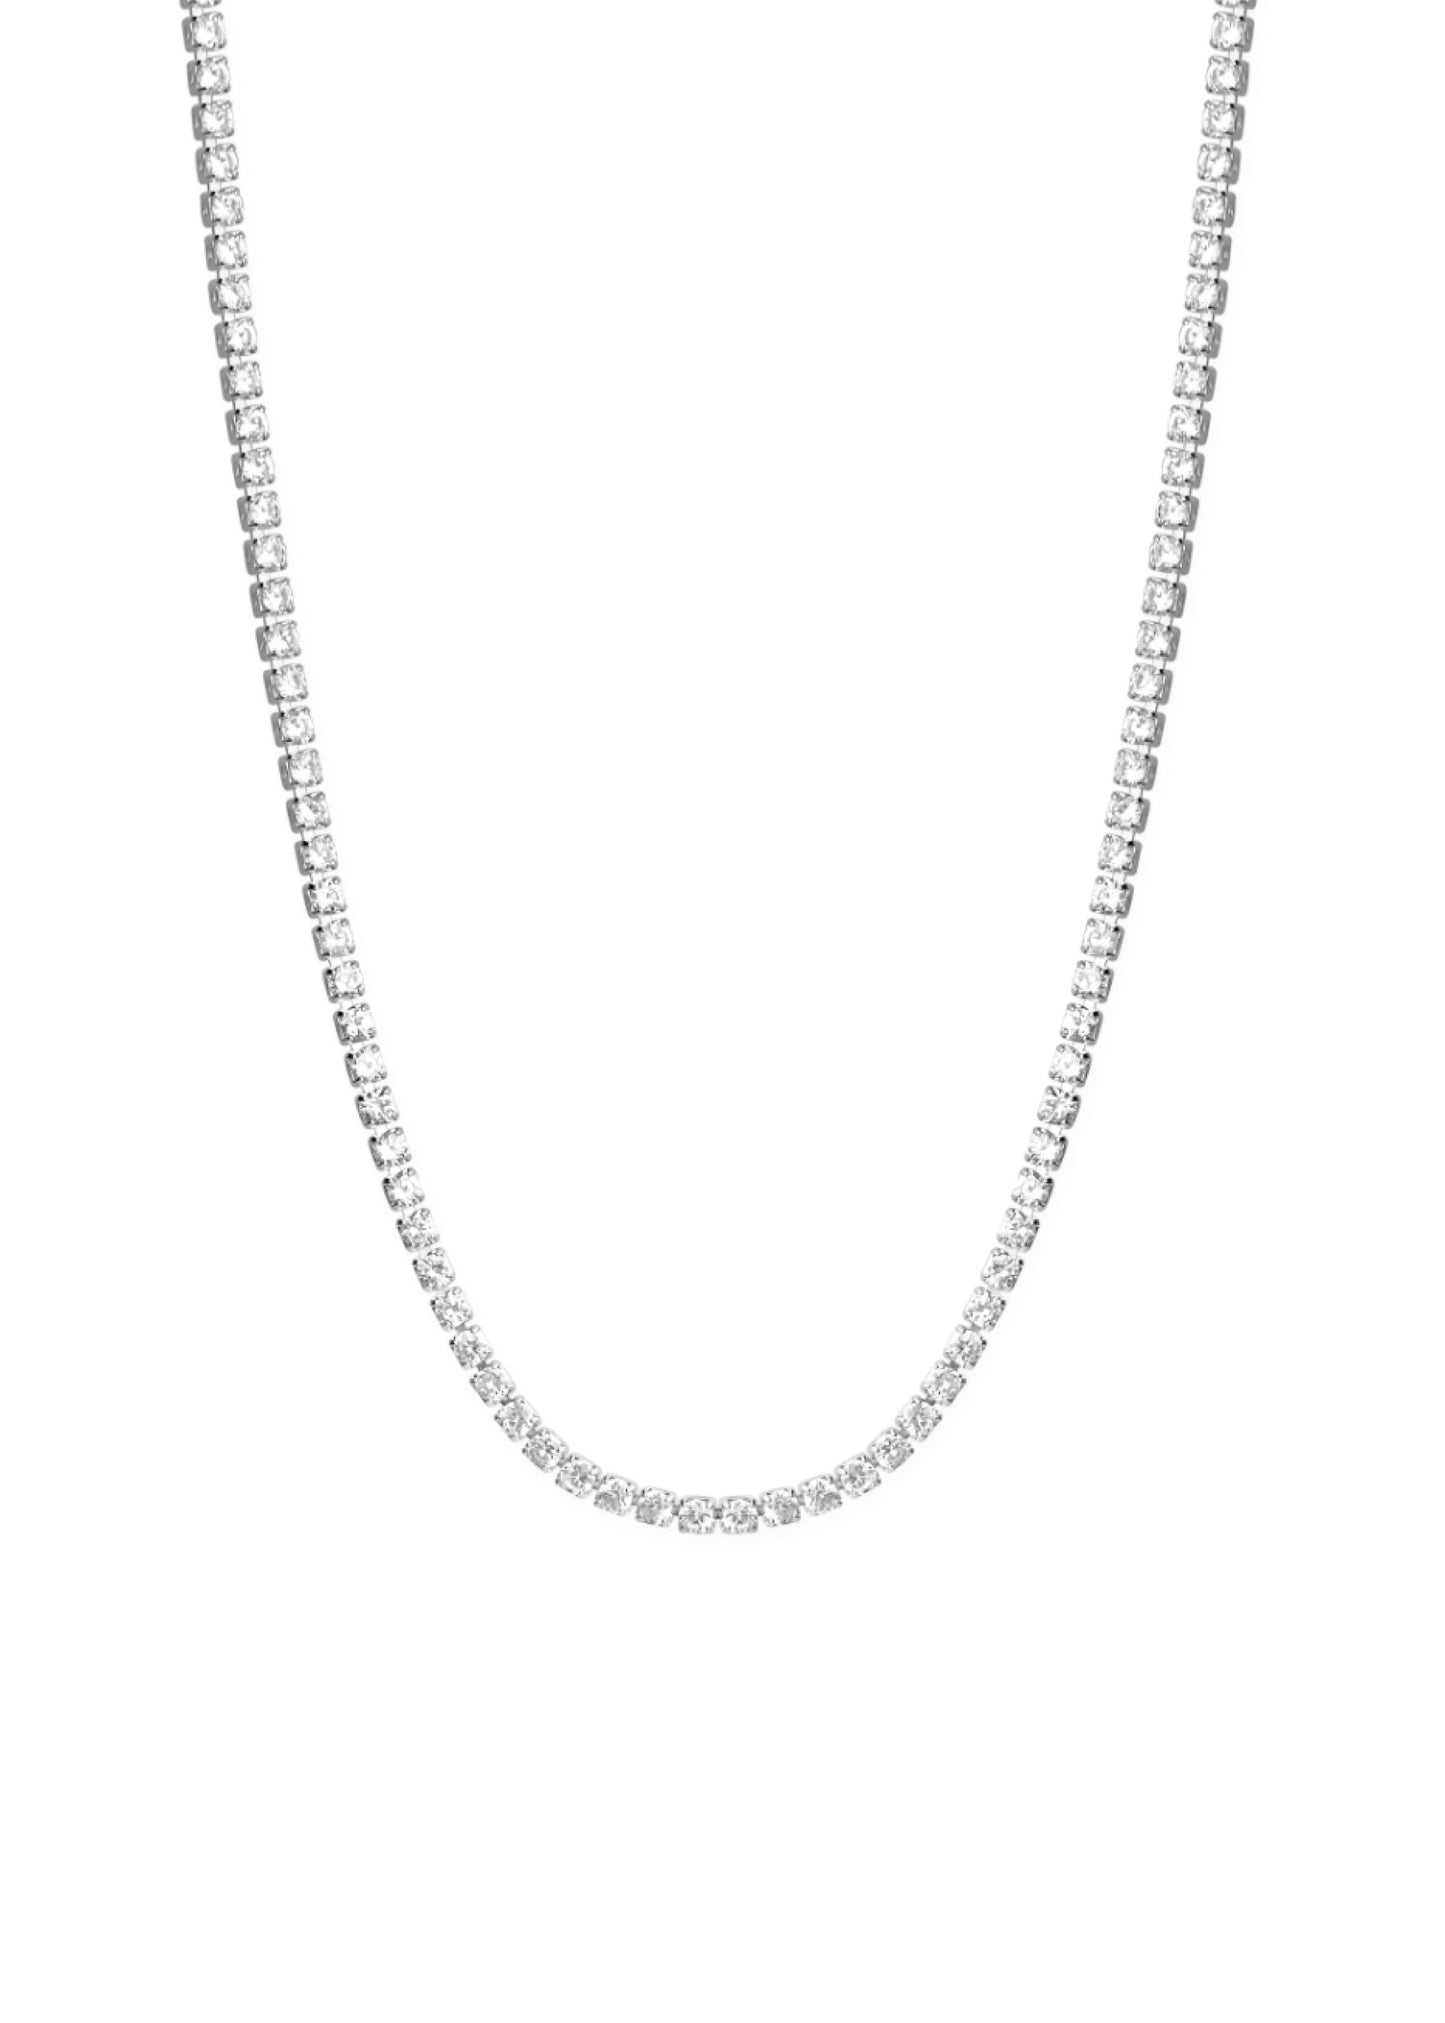 Thin Tennis Necklace Silver